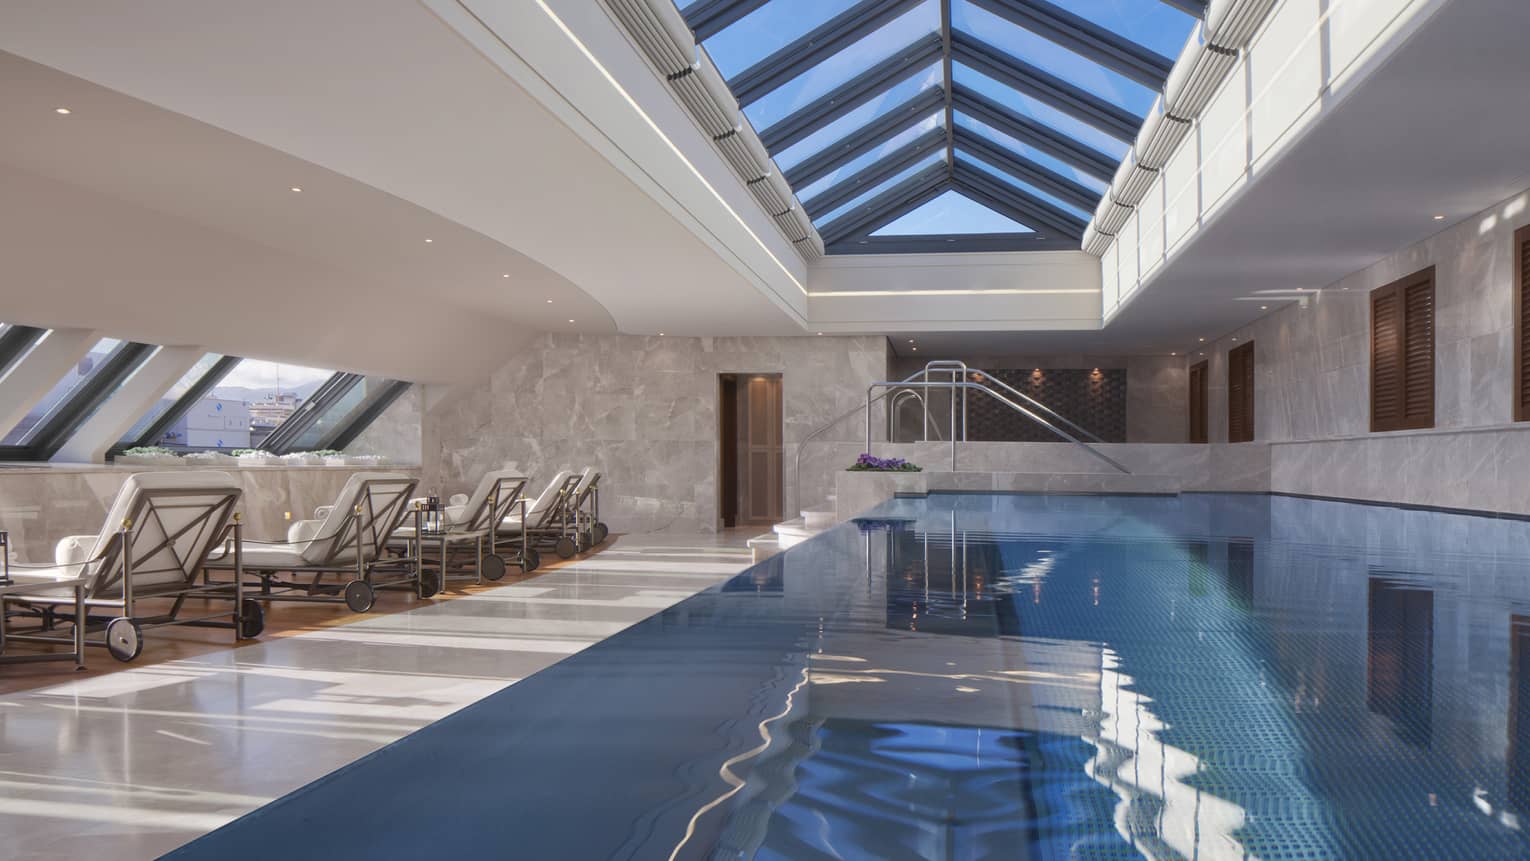 Spa pool under skylights and flanked with lounge chairs